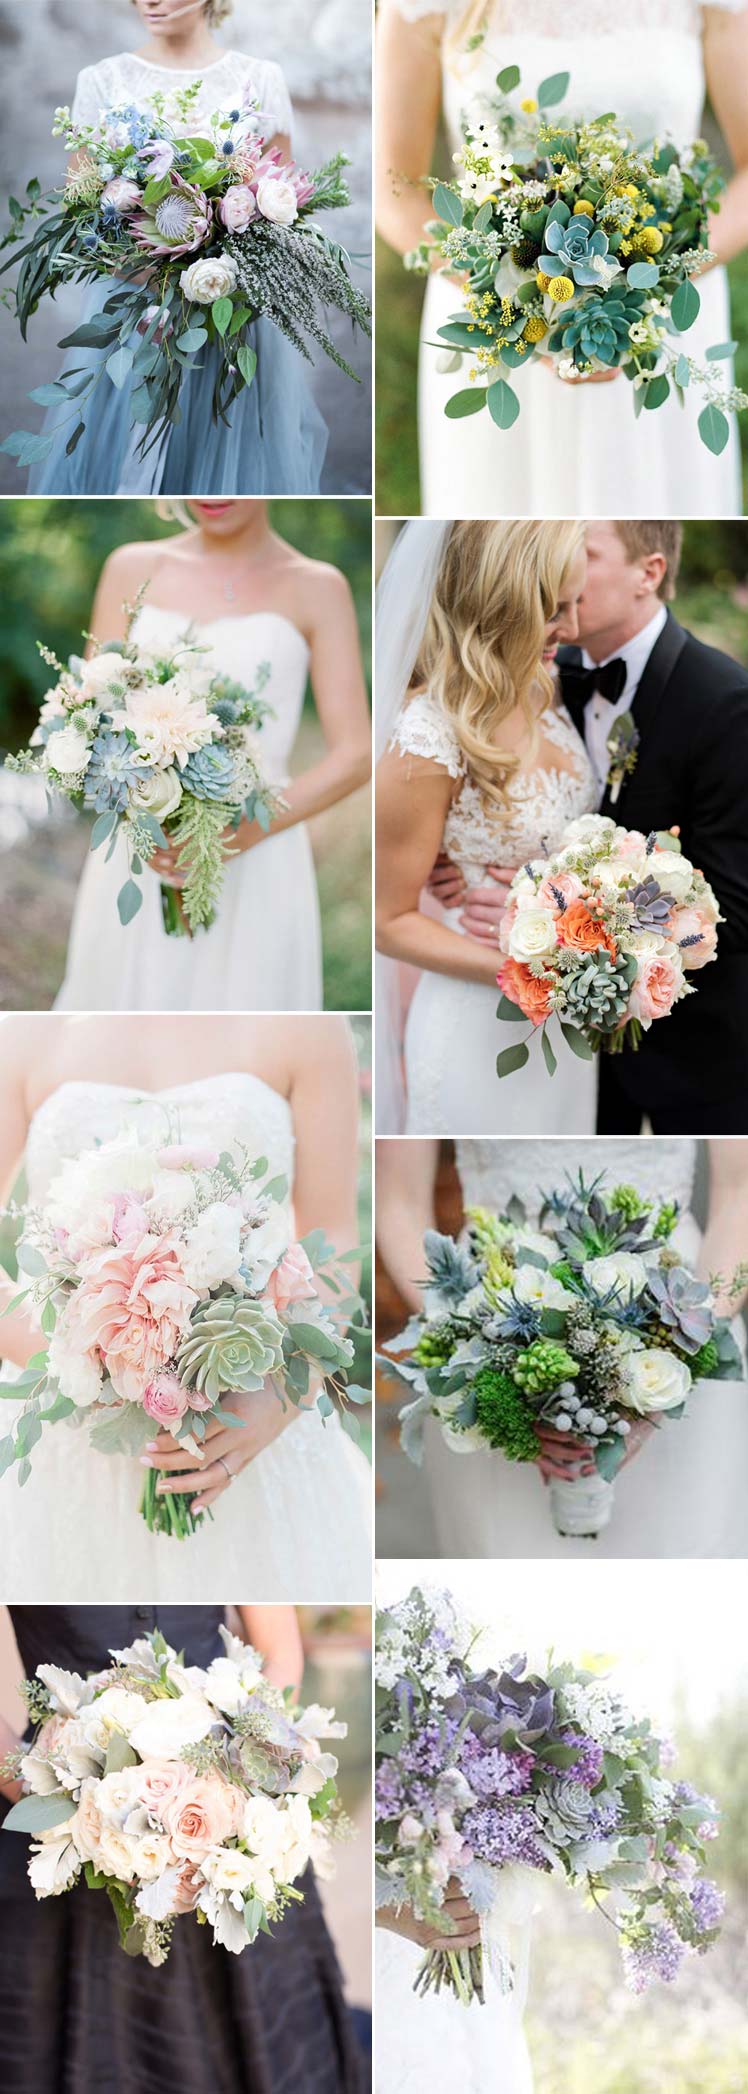  Succulent bridal bouquet inspiration for your special day